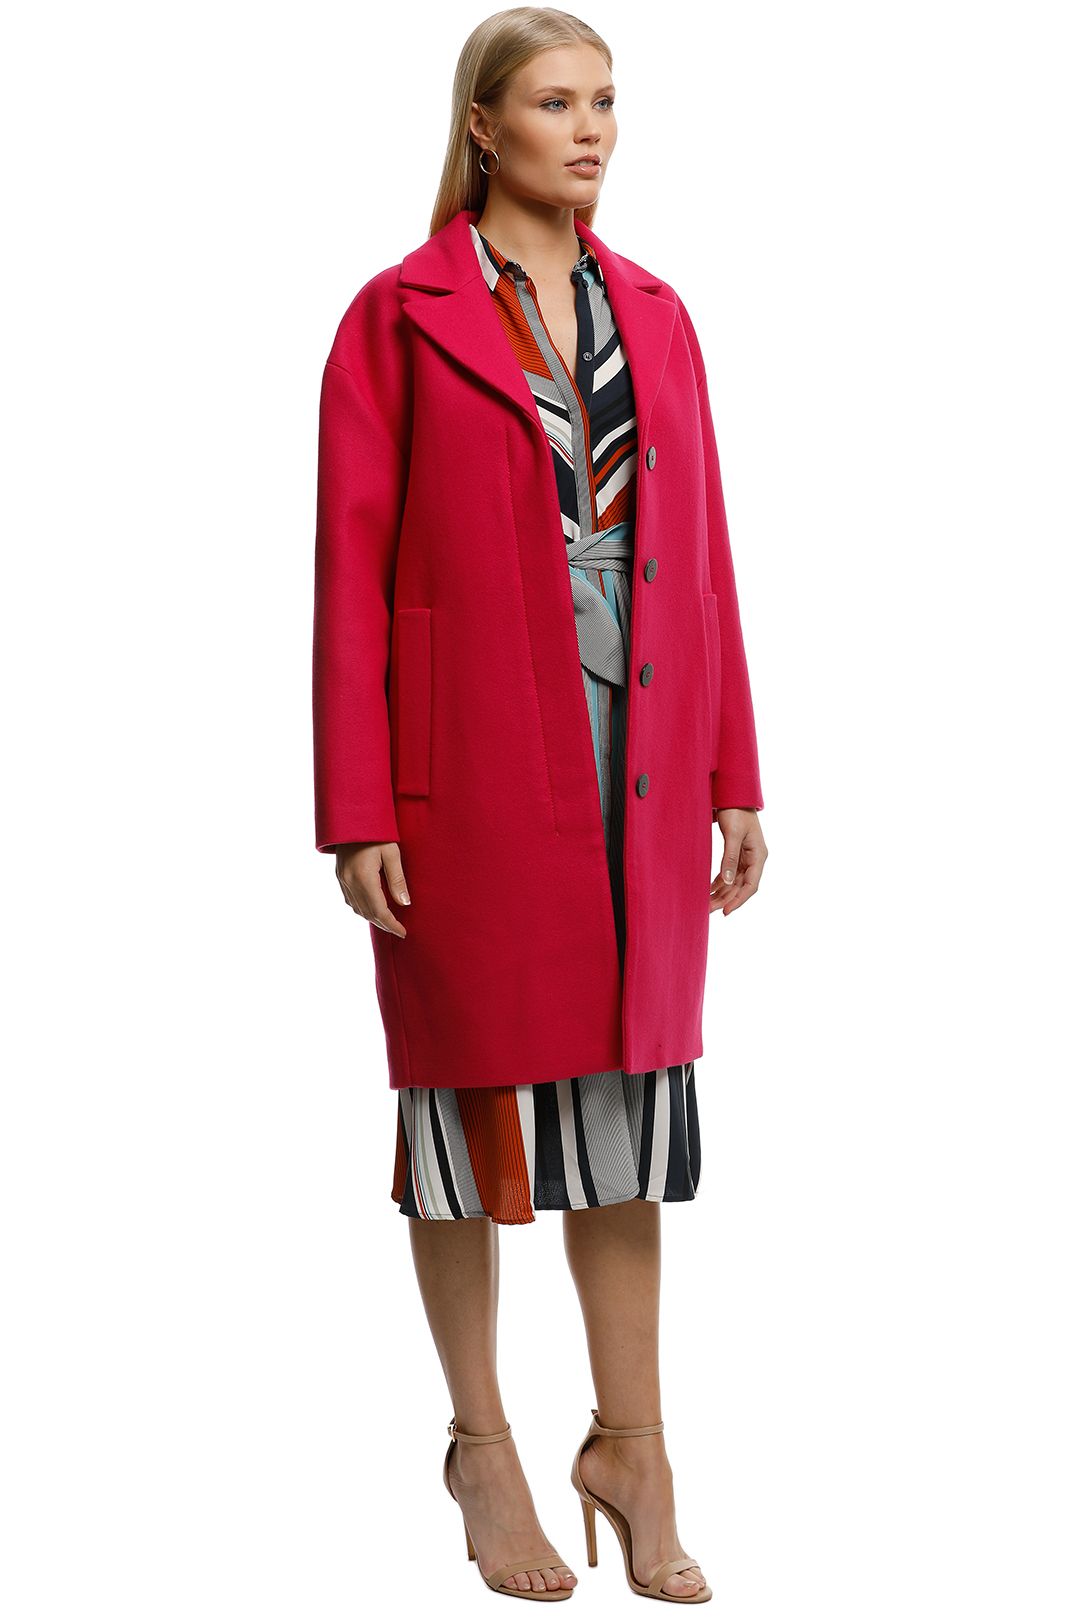 MNG-Unstructured-Wool-Blend-Coat-Fuchsia-Side